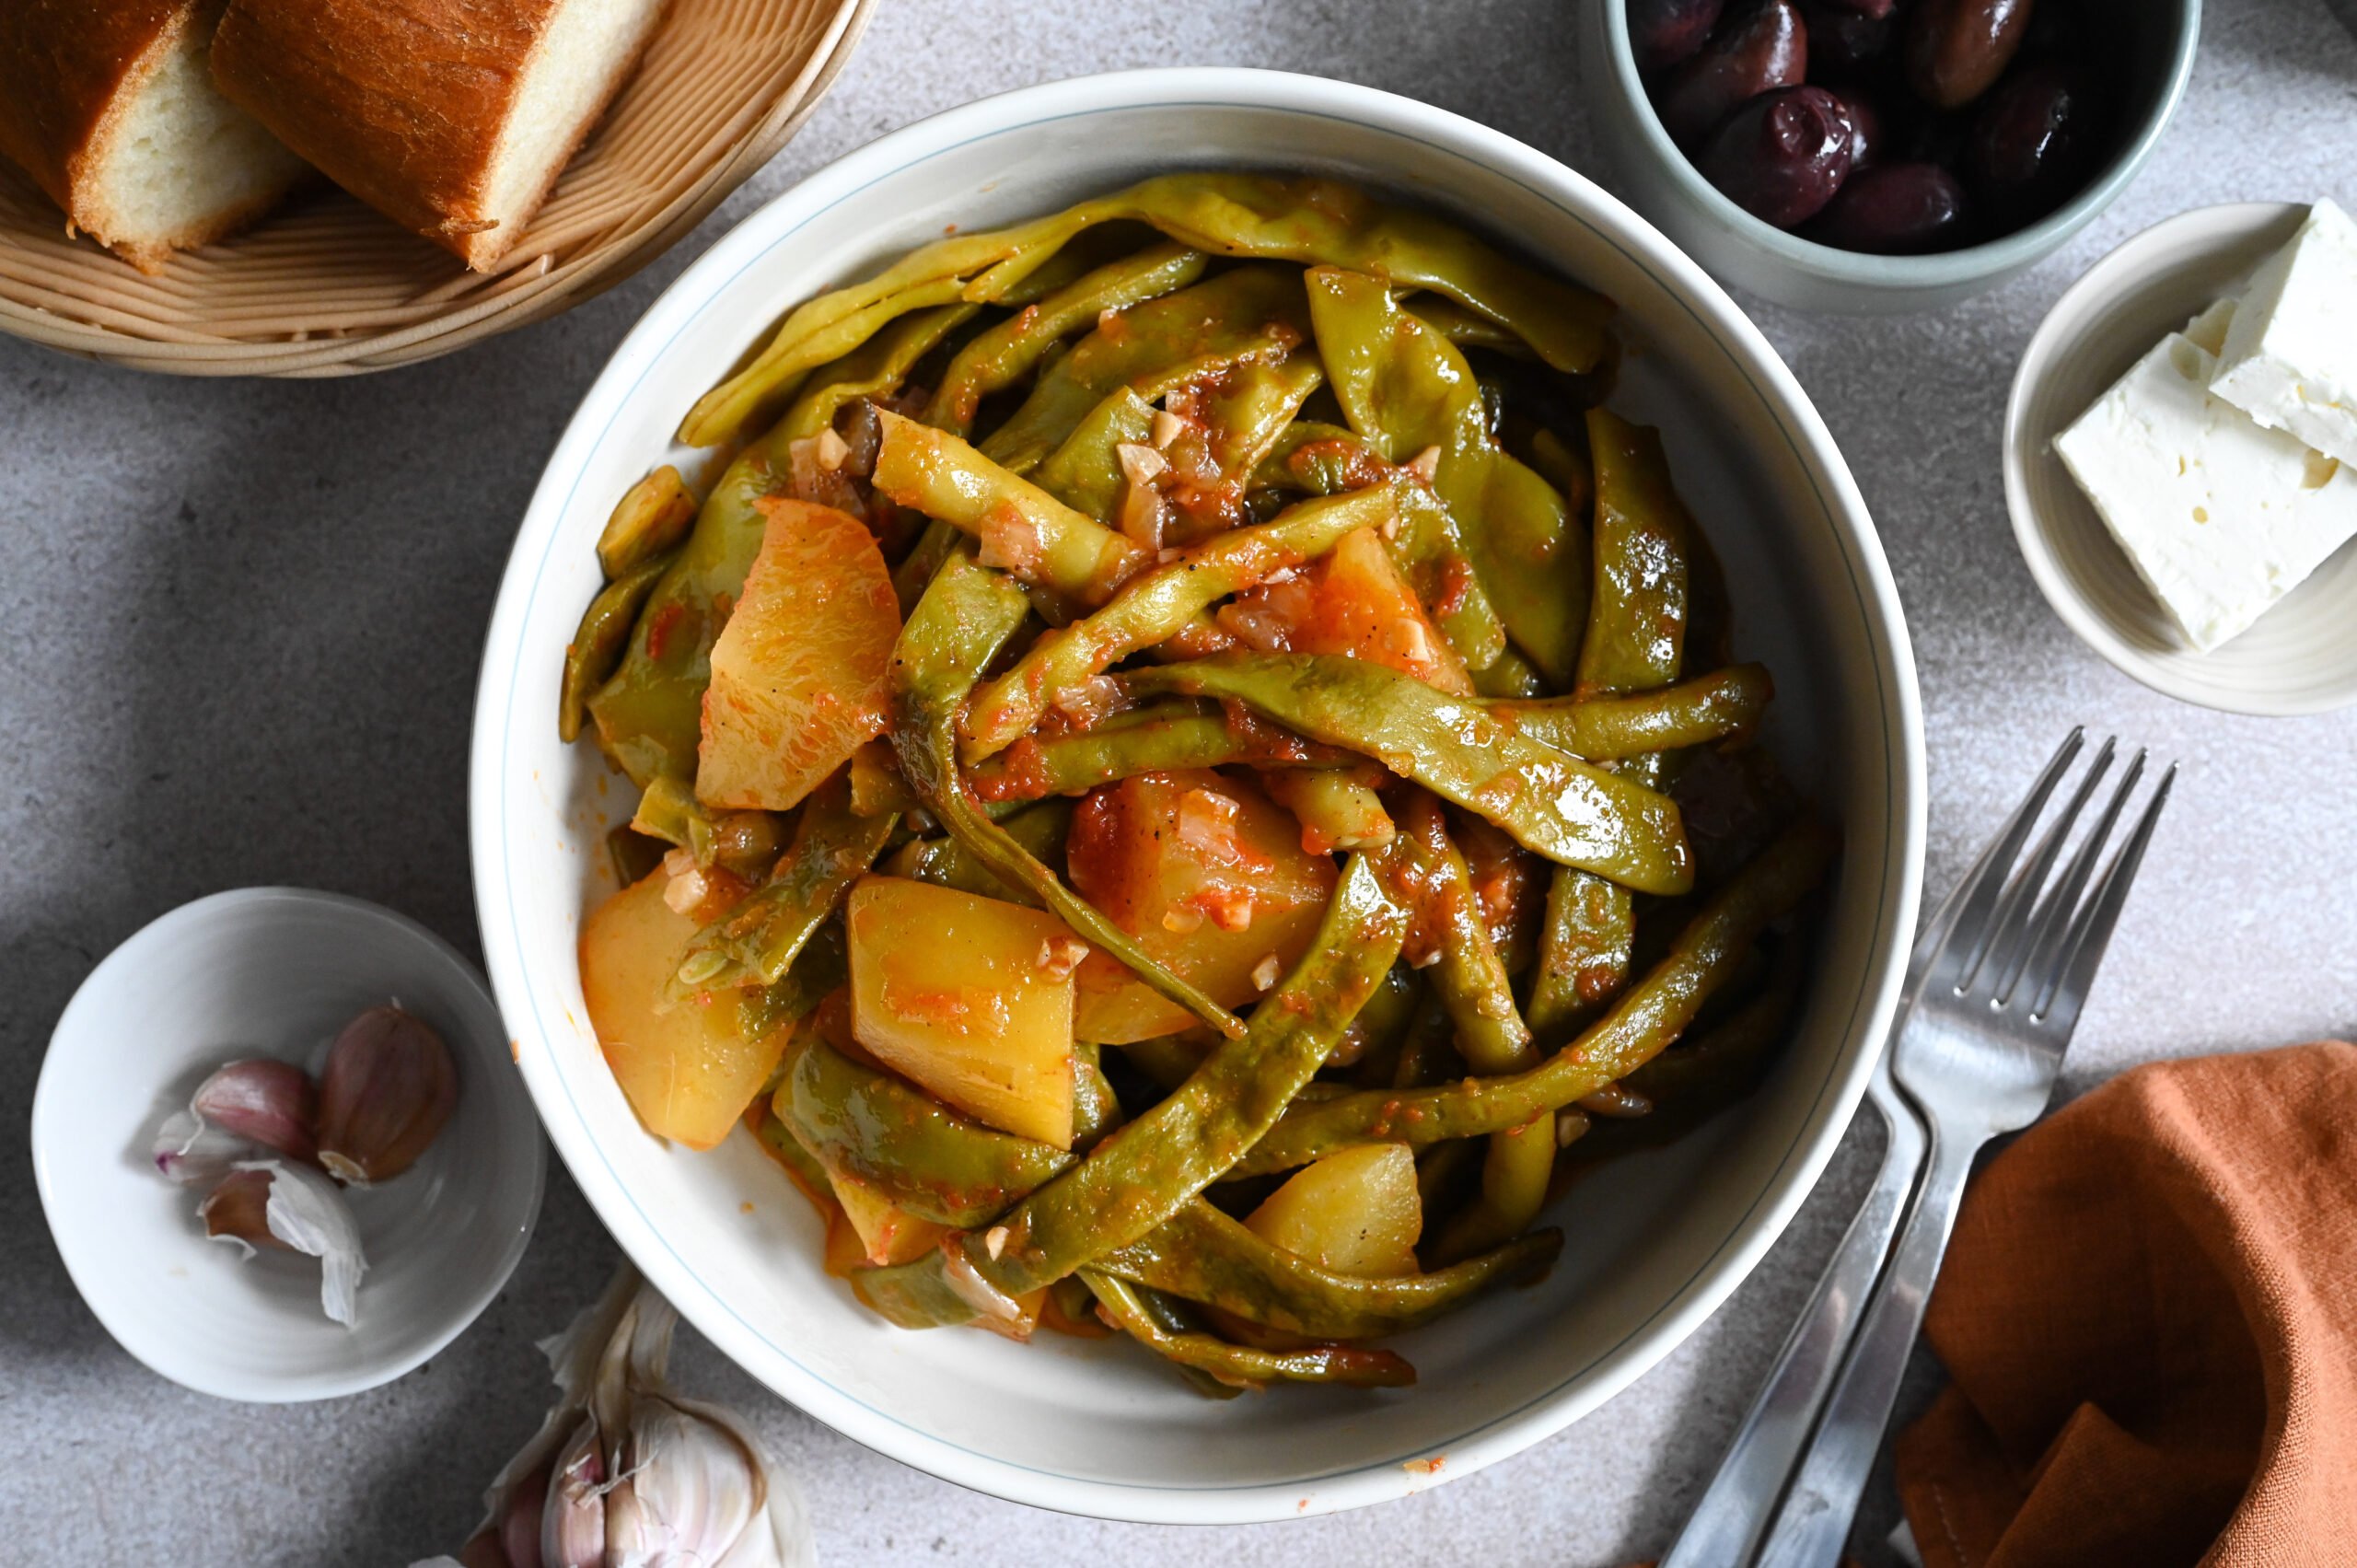 Green beans with potatoes (Φασολάκια λαδερά με πατάτες)